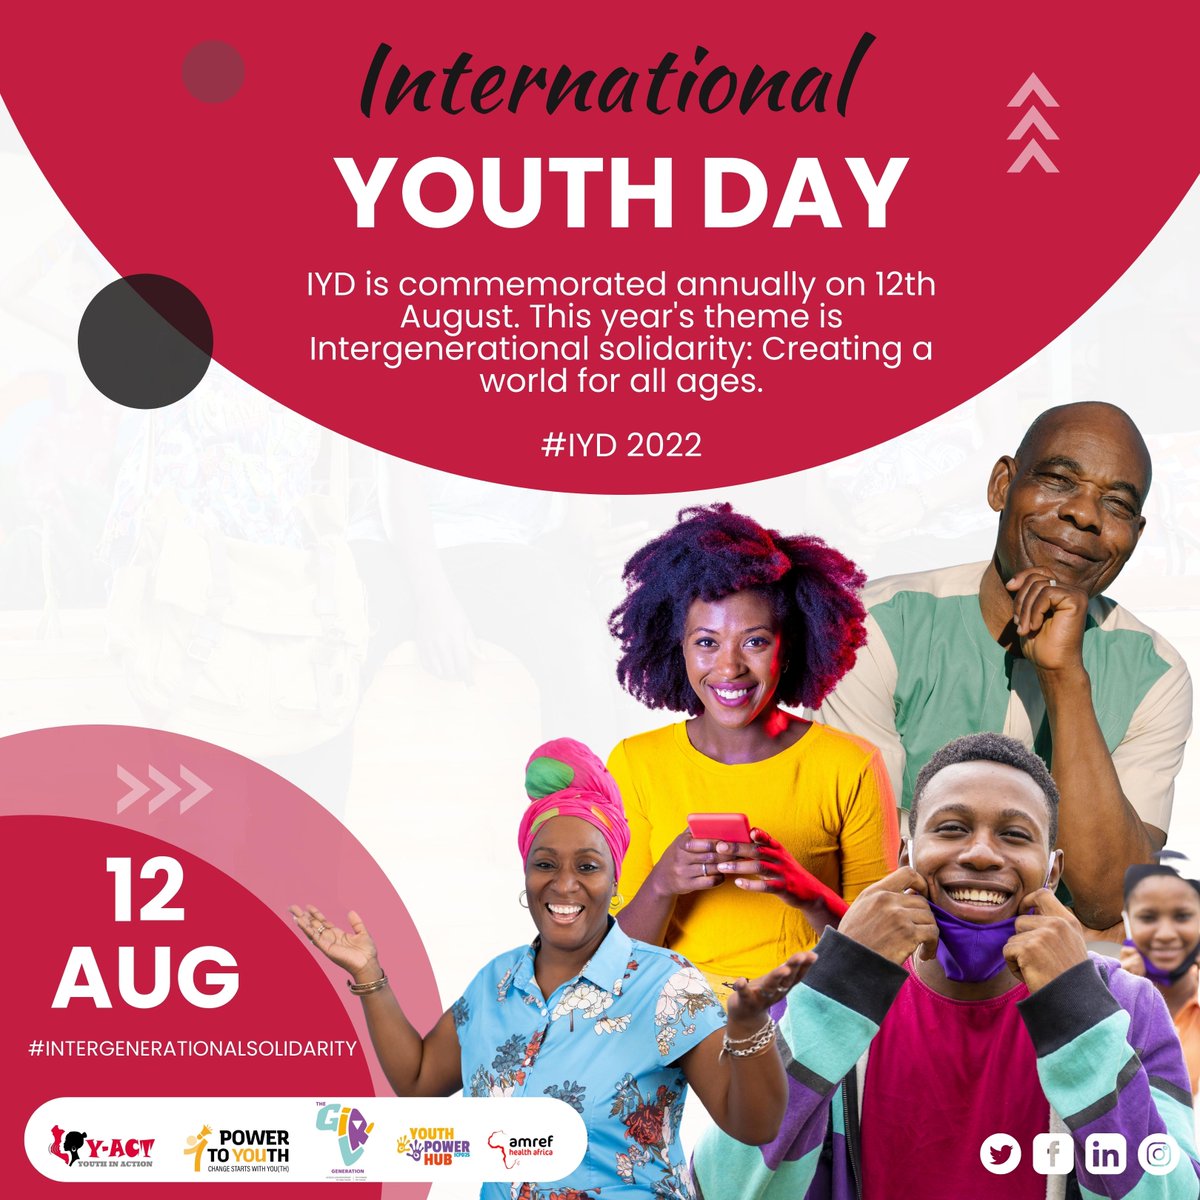 As youth, our voice matters. Especially on issues that affect us such as child marriage, FGM/C, and SGBV. Speak up against the violation of youth rights. Your voice and participation count! @PowerToYouth21 #POWER2YOUTH #IYD2022 #FORYOUTH